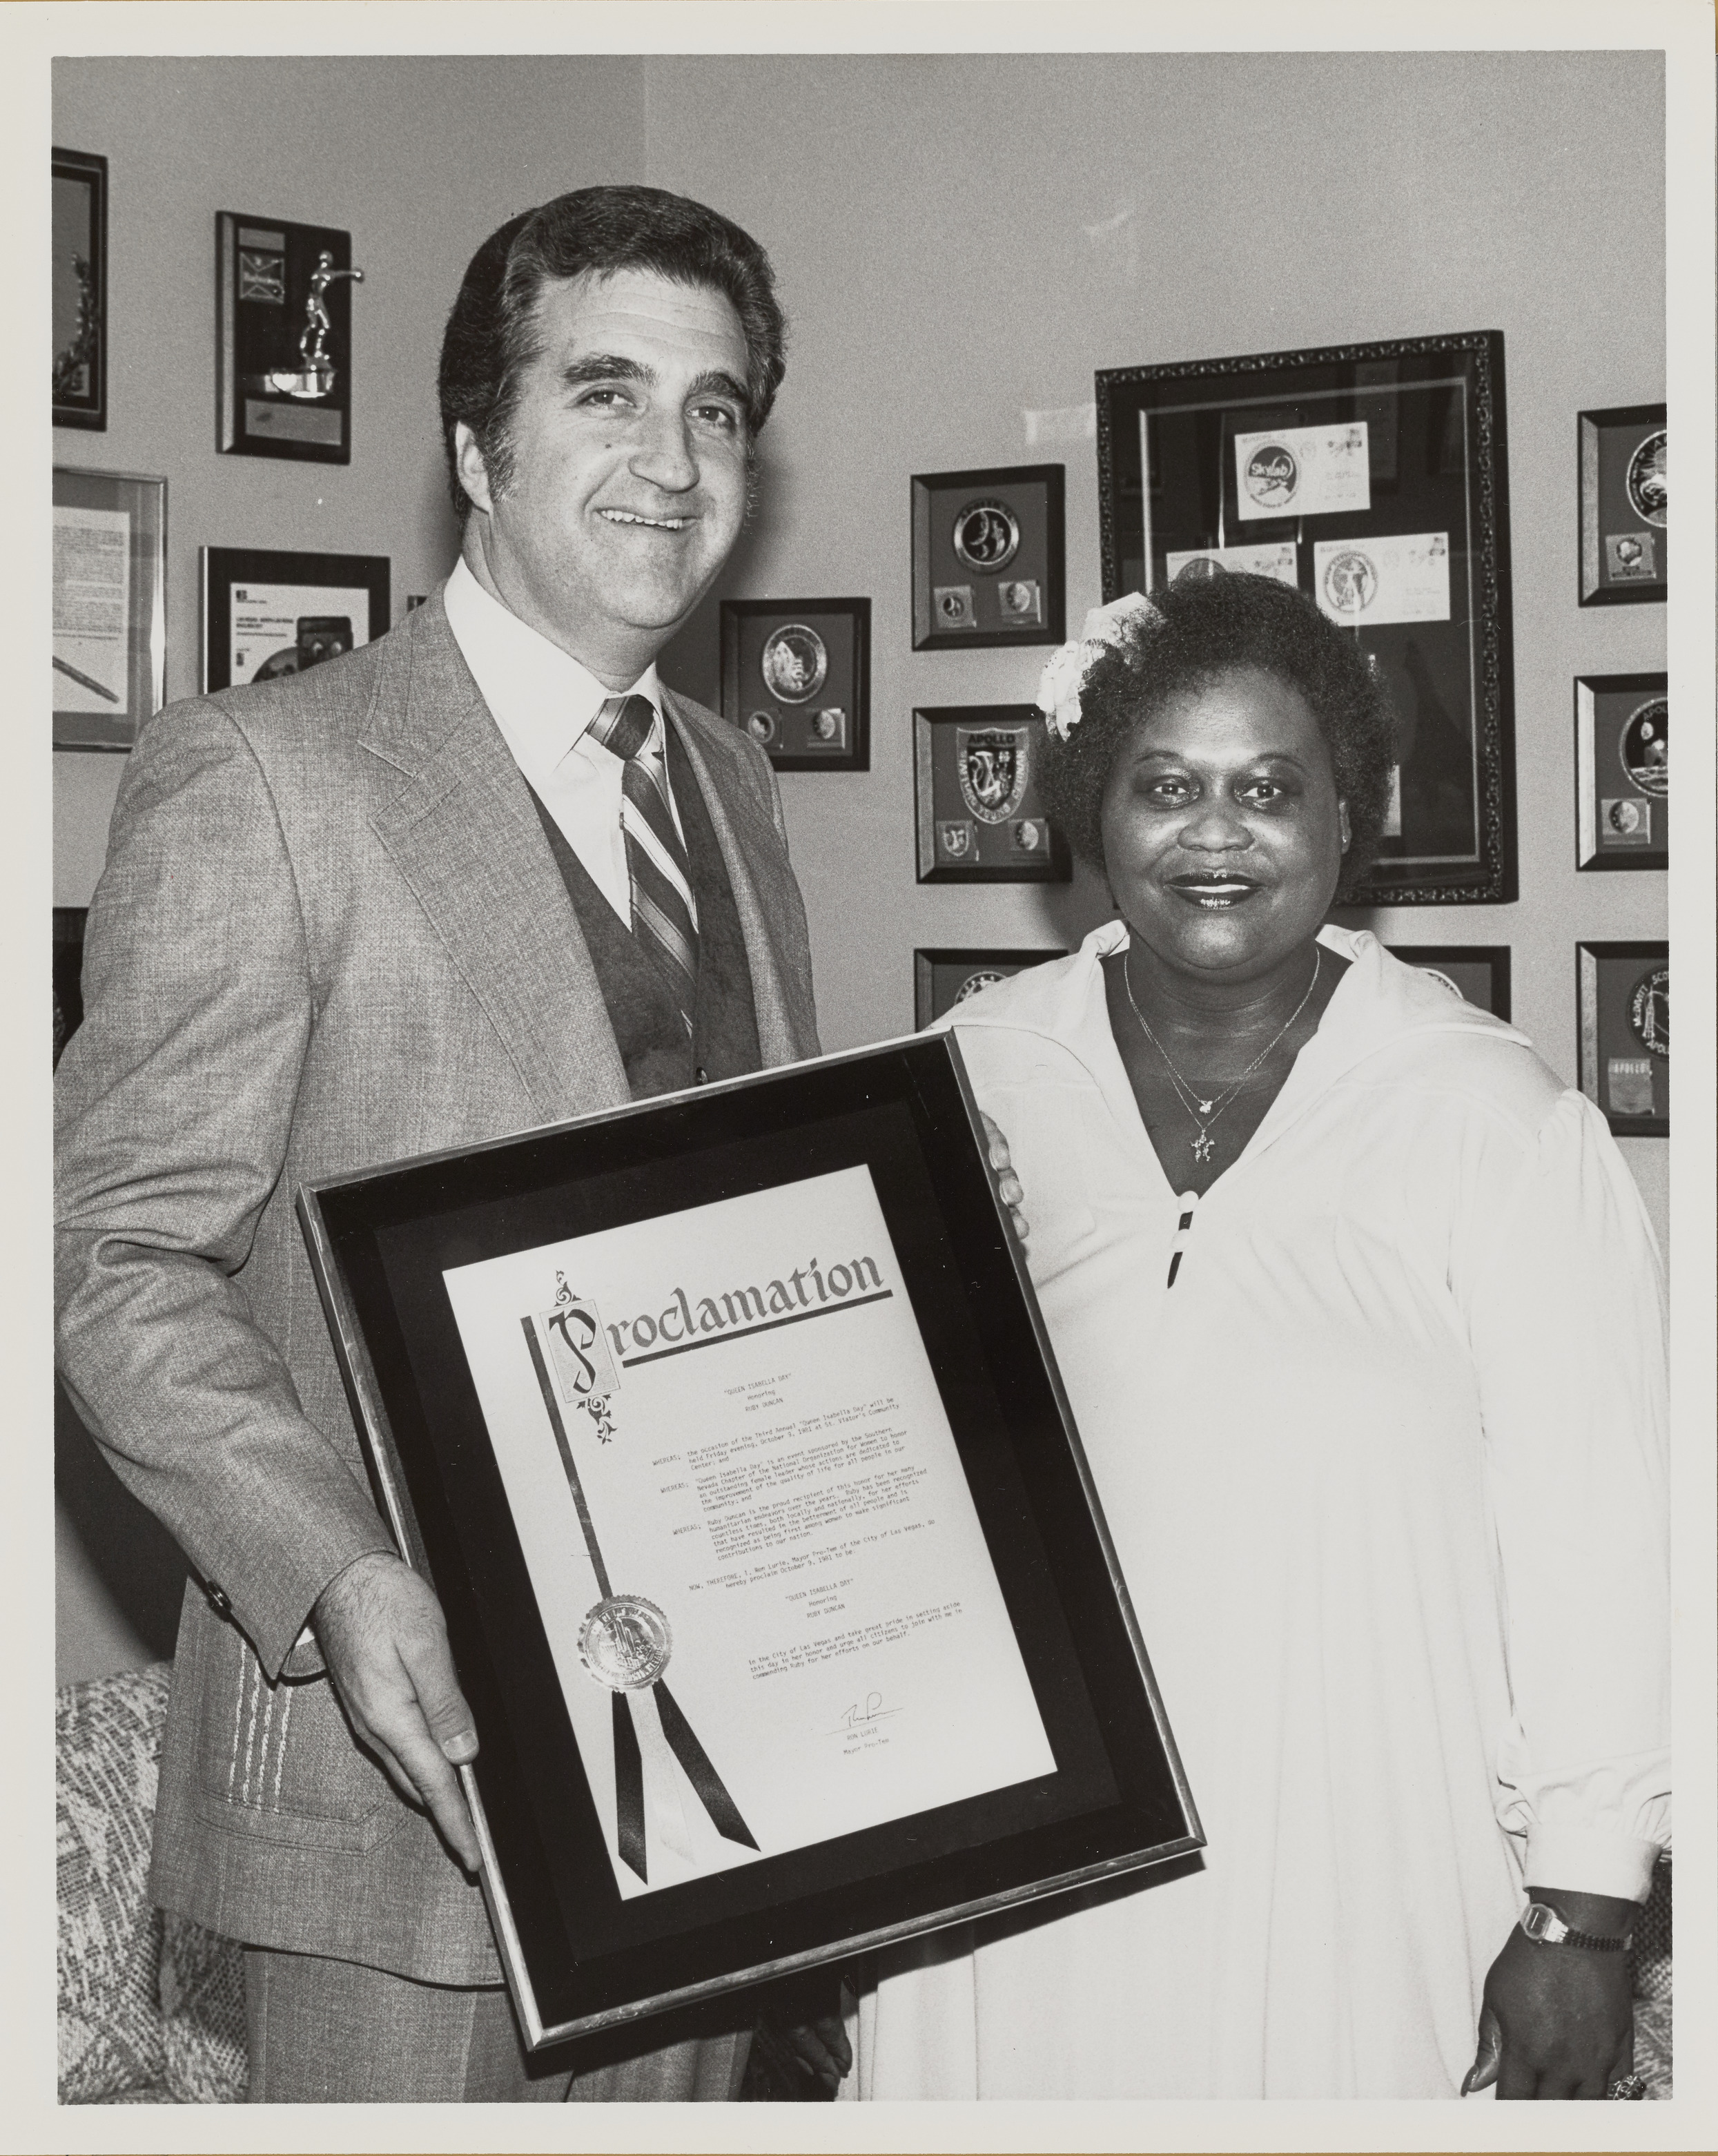 Photograph of Ron Lurie with Proclamation for Joan Isabella Day, presentation to Ruby Duncan, October 7, 1981